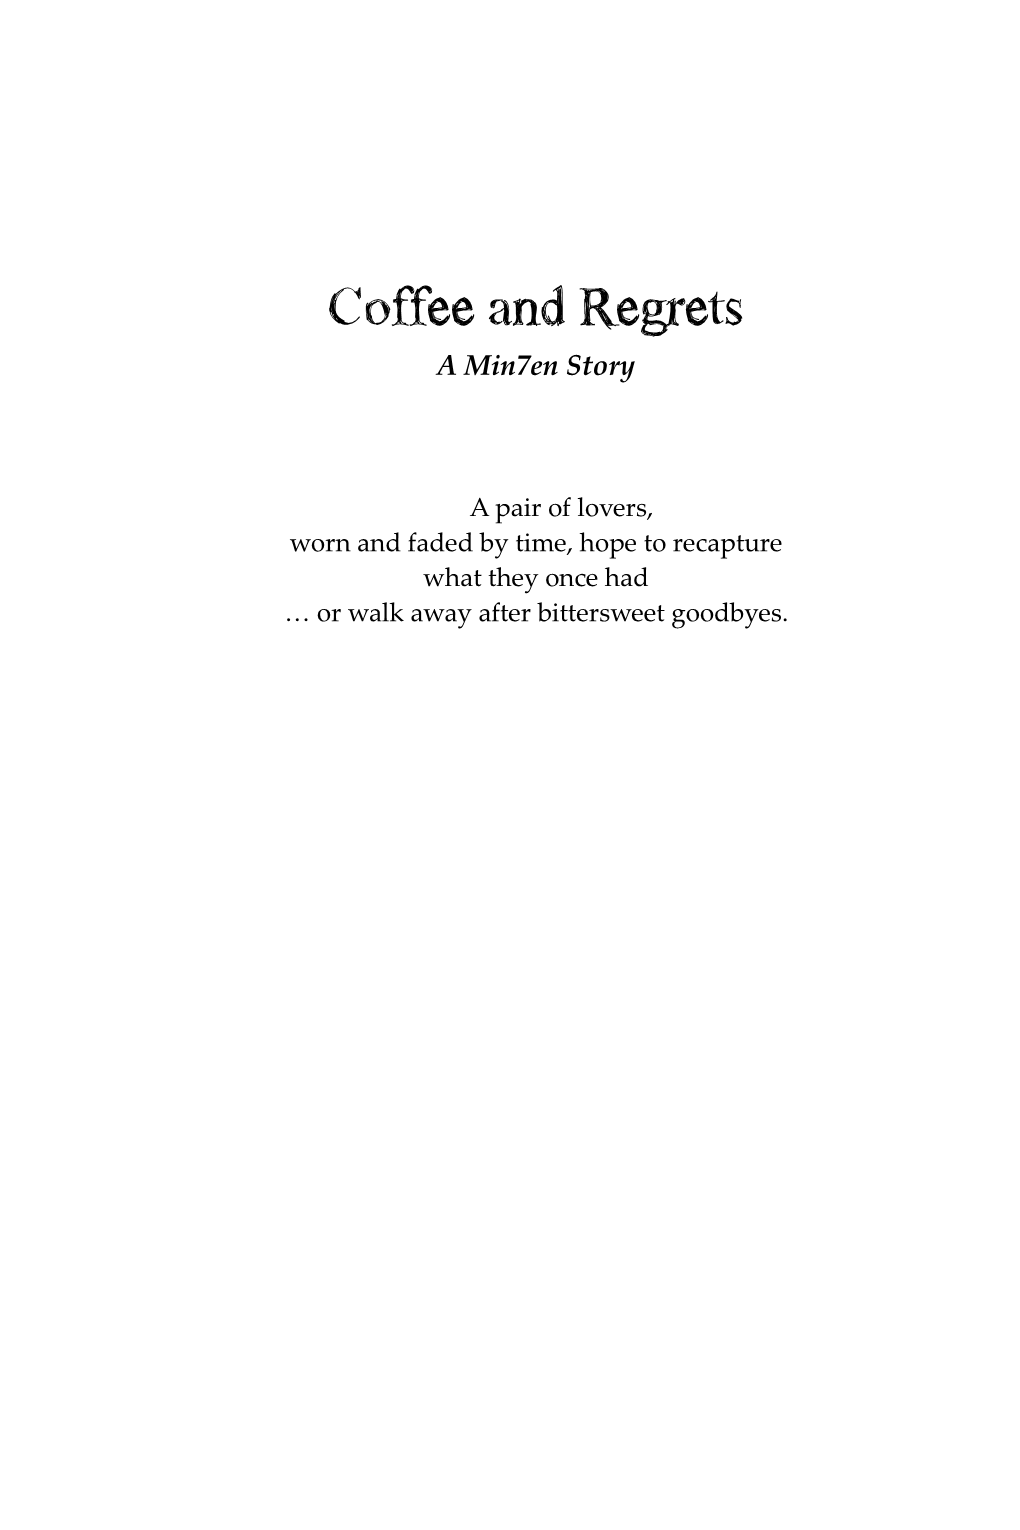 Coffee and Regrets